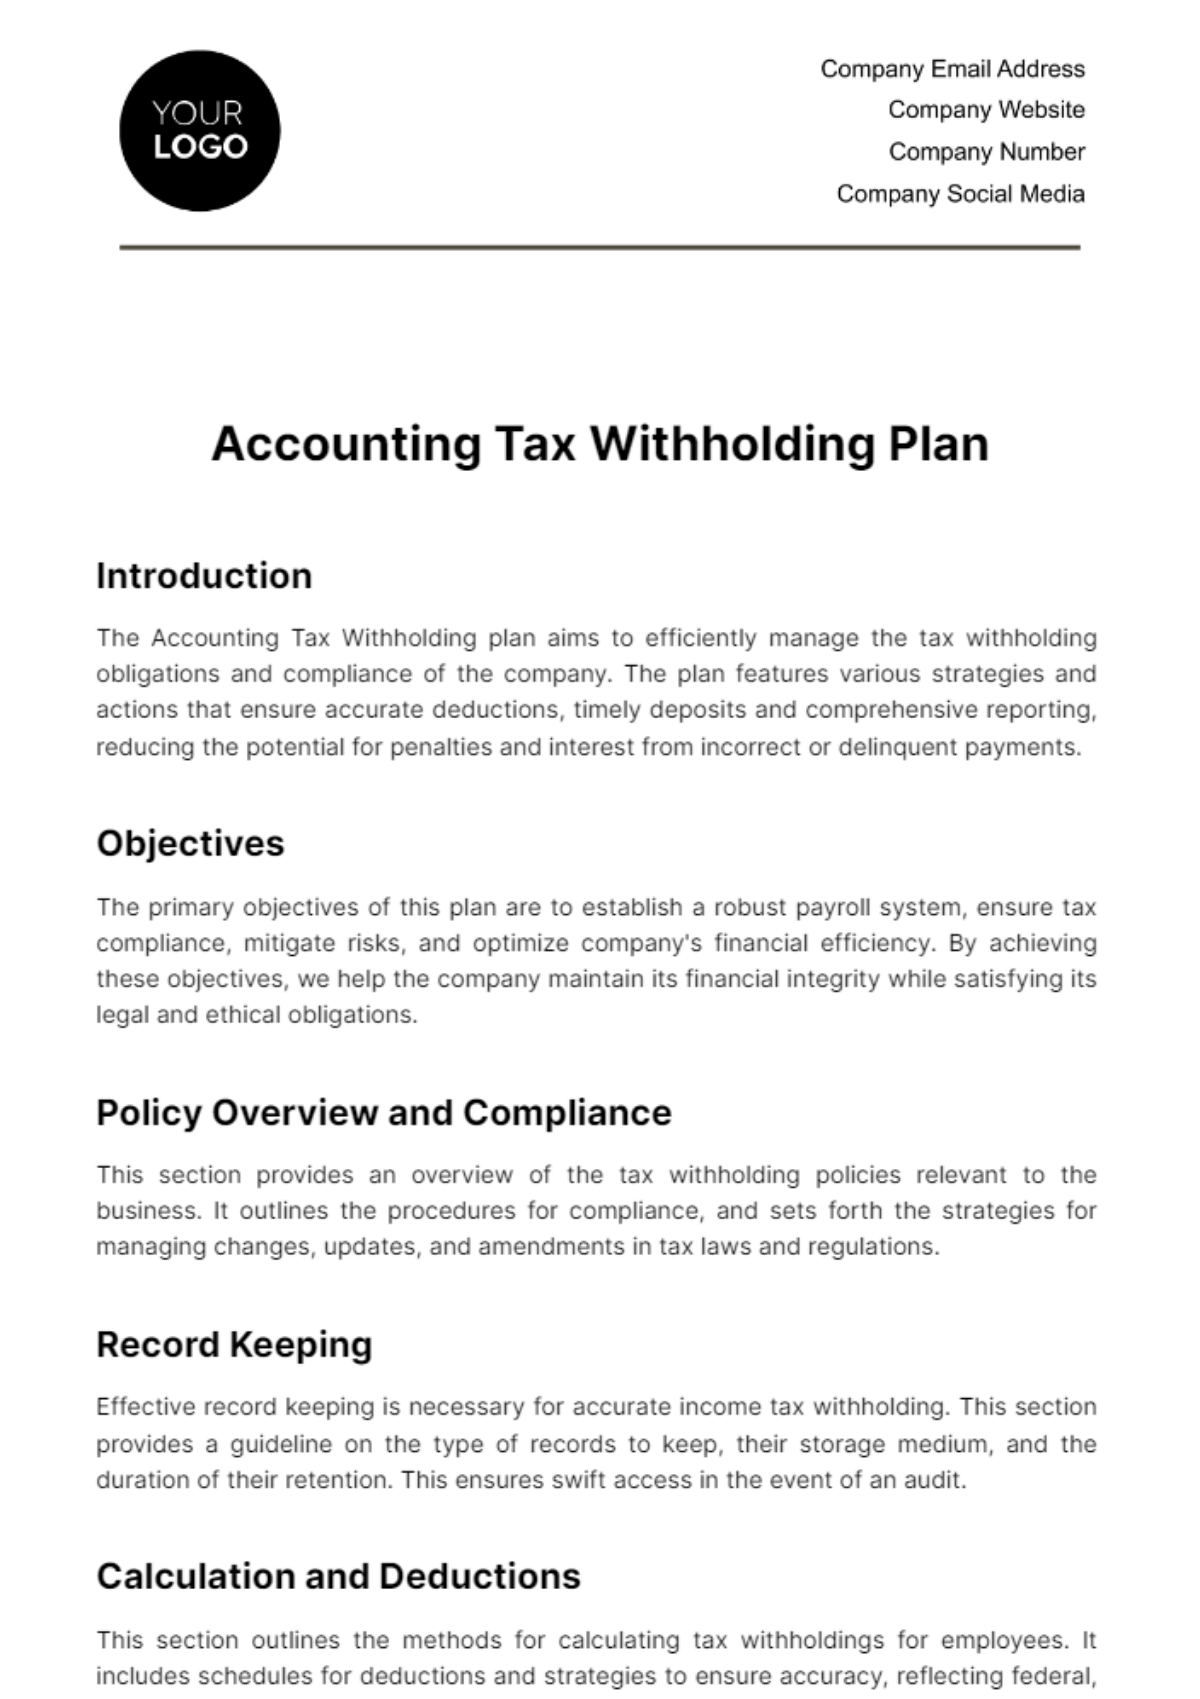 Free Accounting Tax Withholding Plan Template